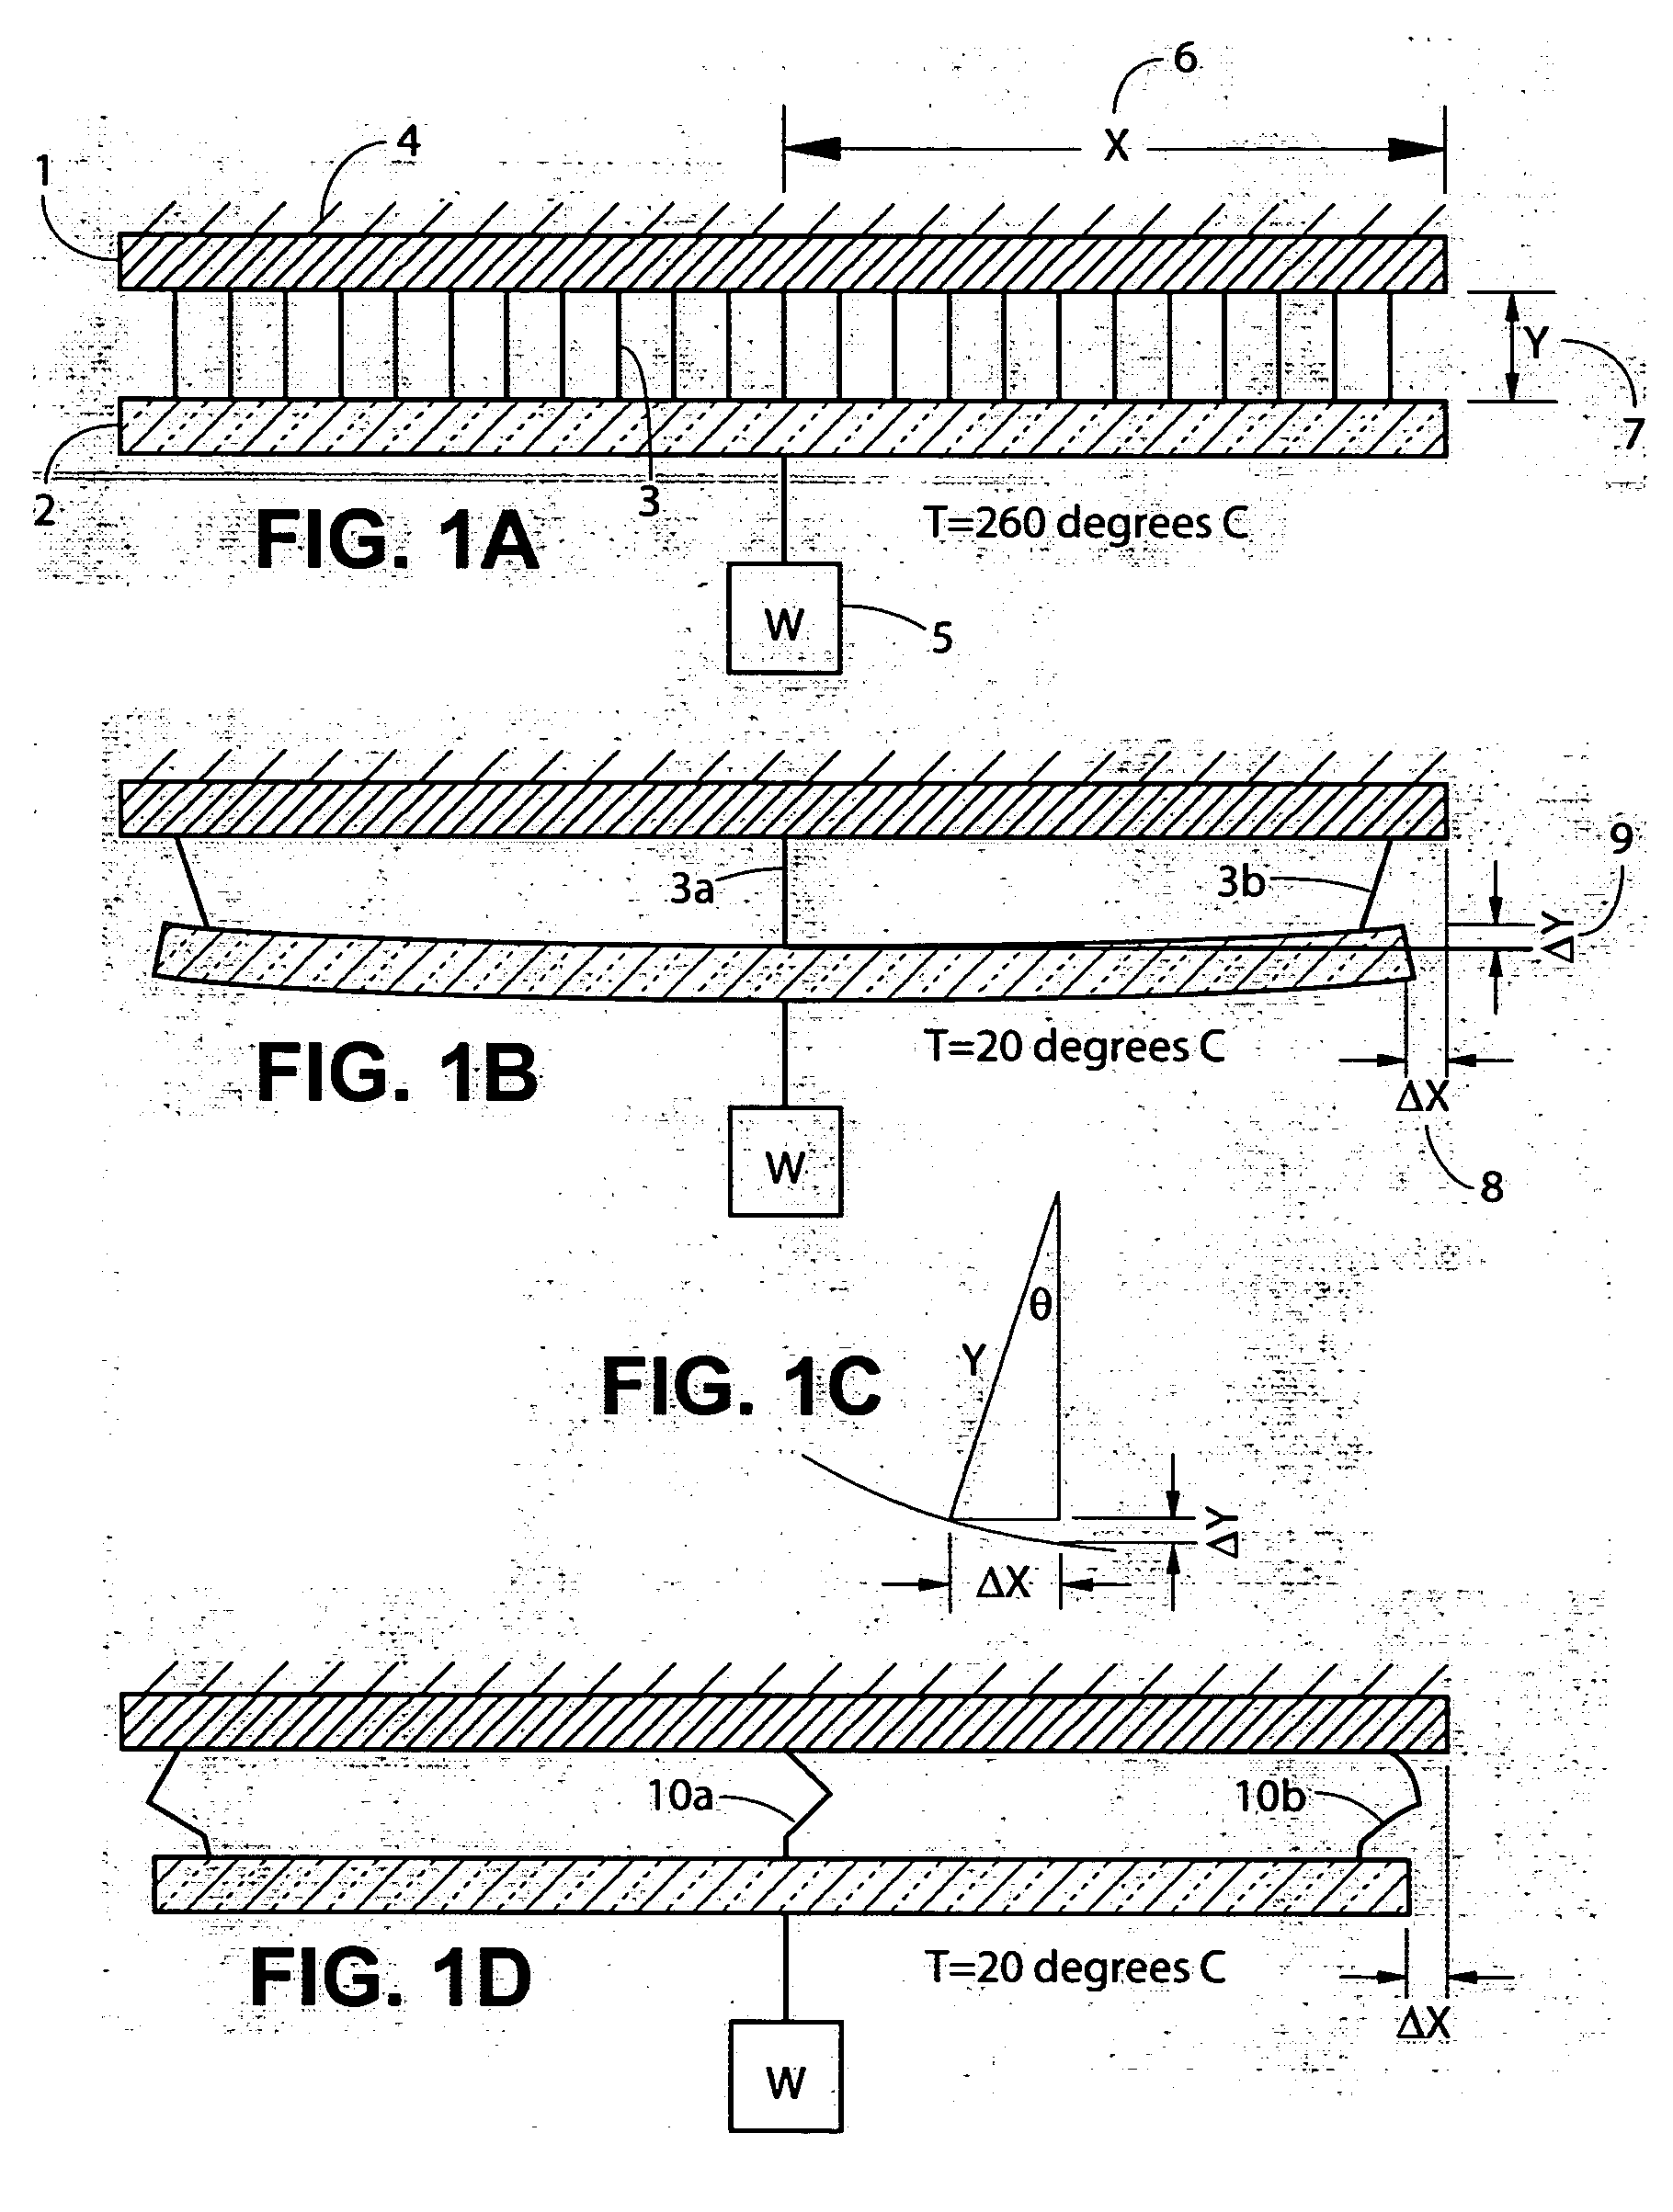 Repairable three-dimensional semiconductor subsystem